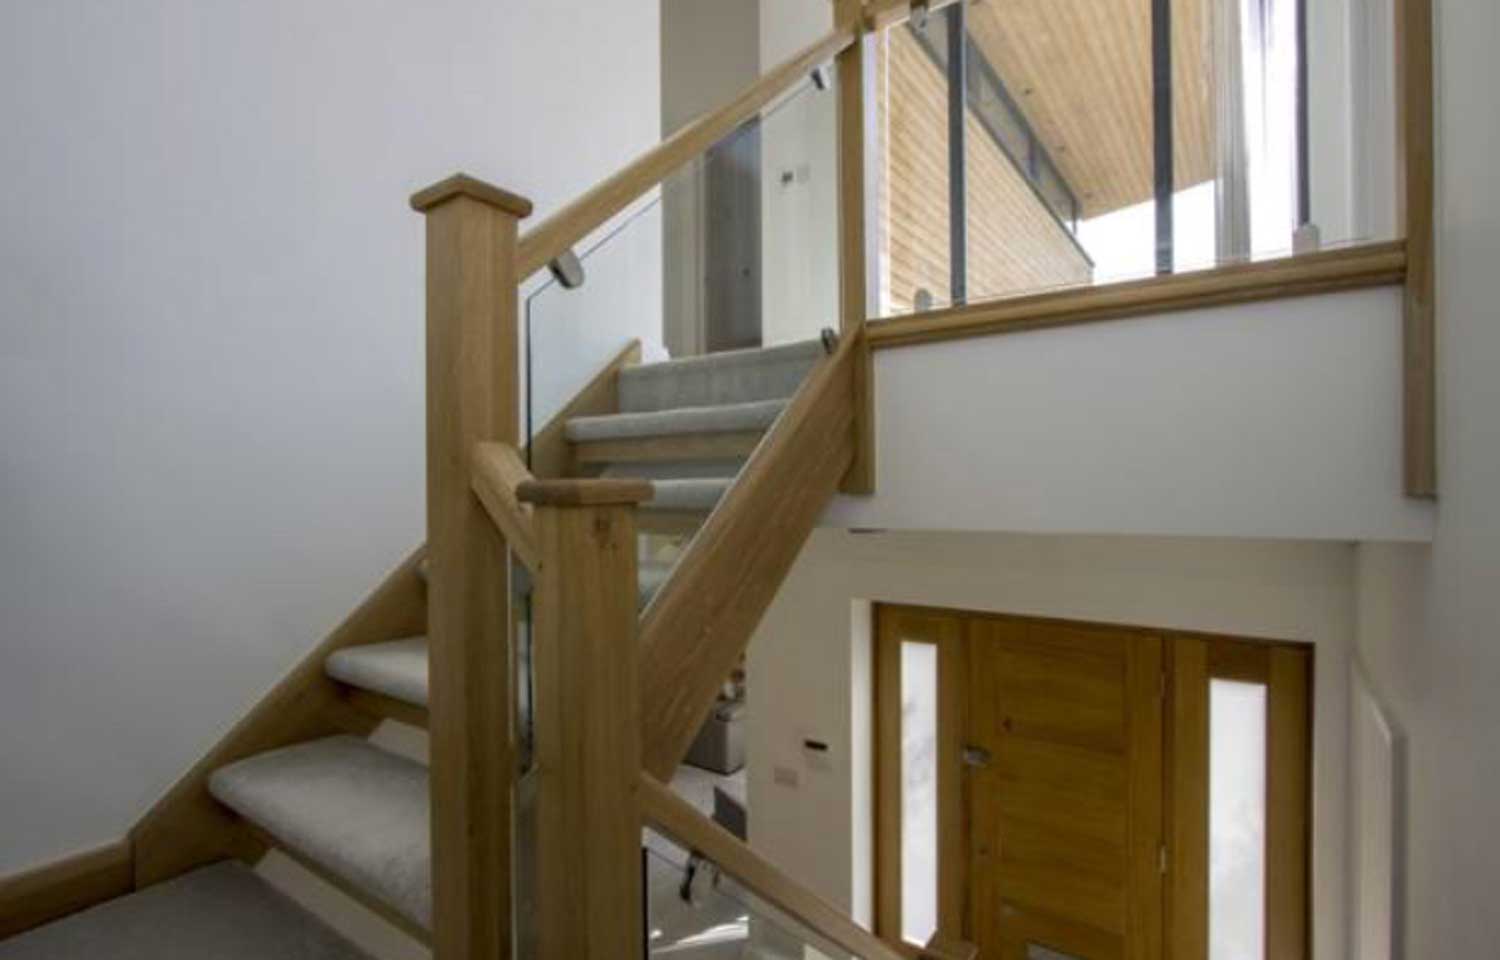 Open Riser staircase with glass balusters